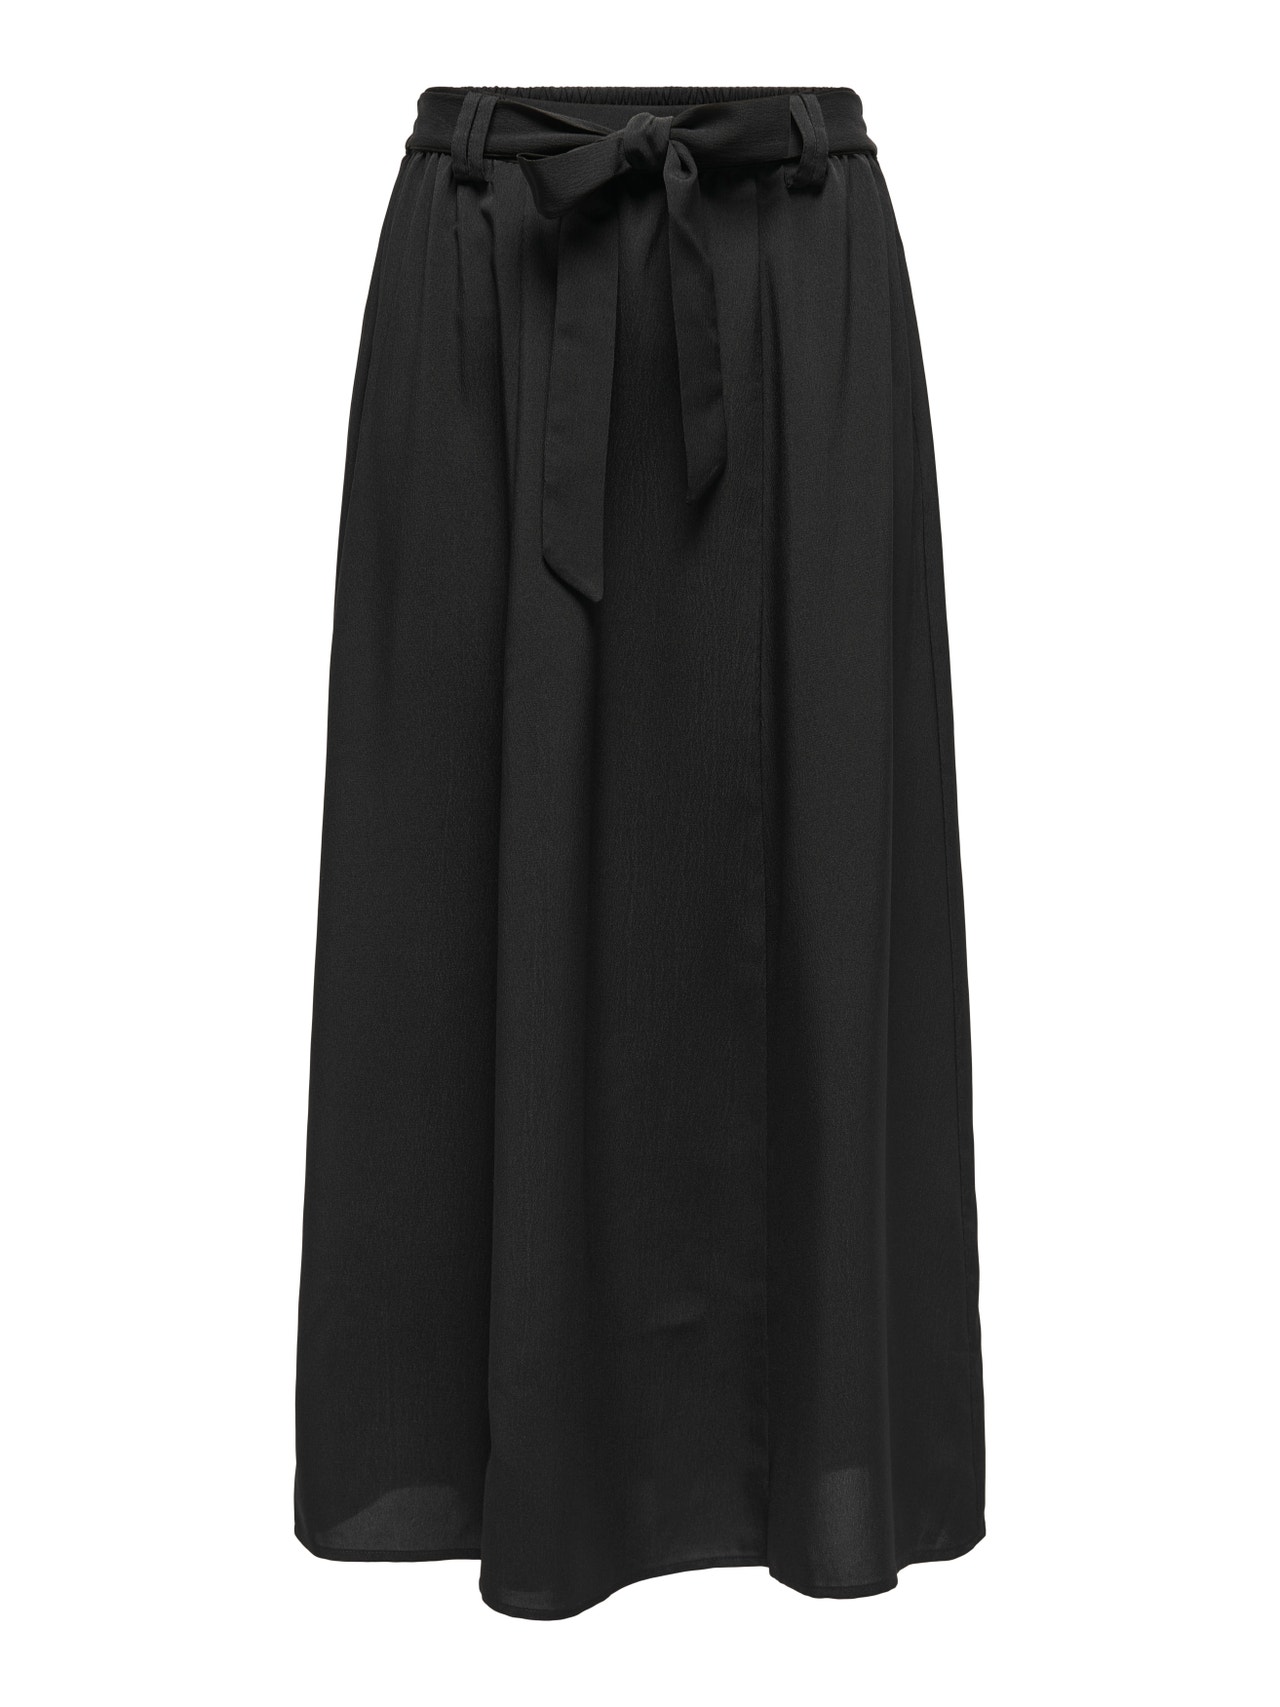 ONLY Maxi skirt with belt -Black - 15335565